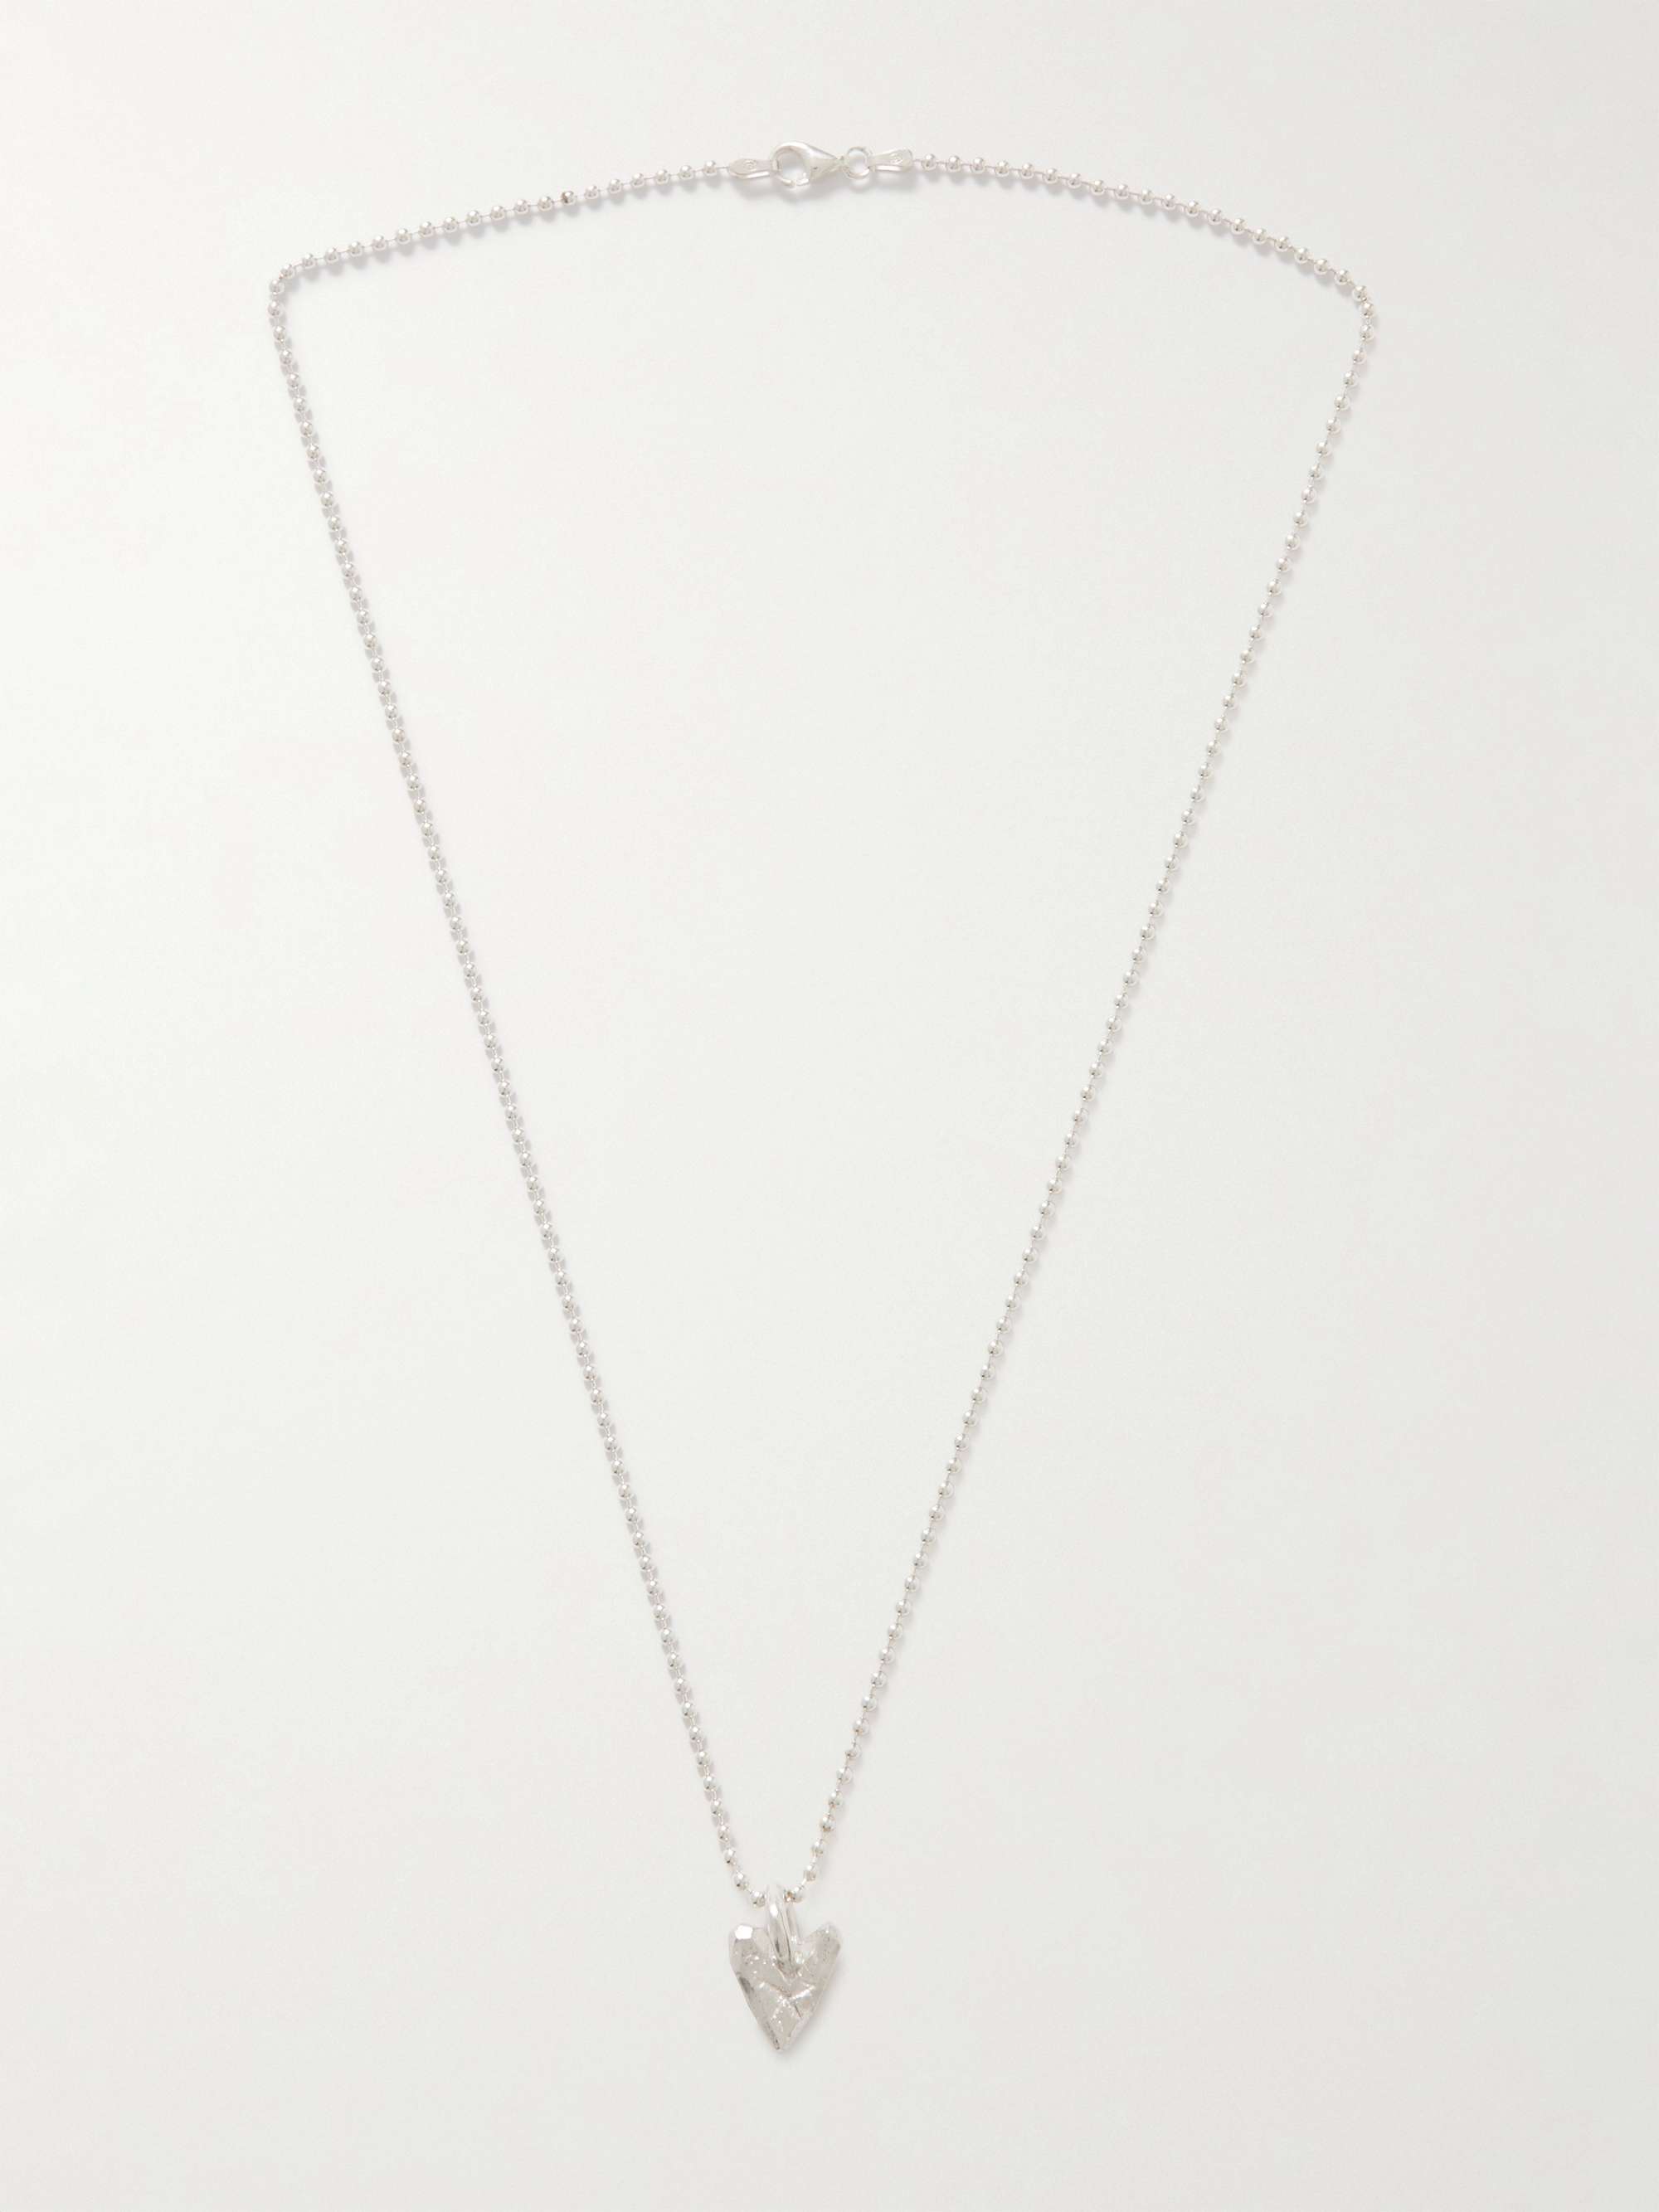 Silver Recycled Silver Pendant Necklace | THE OUZE | MR PORTER